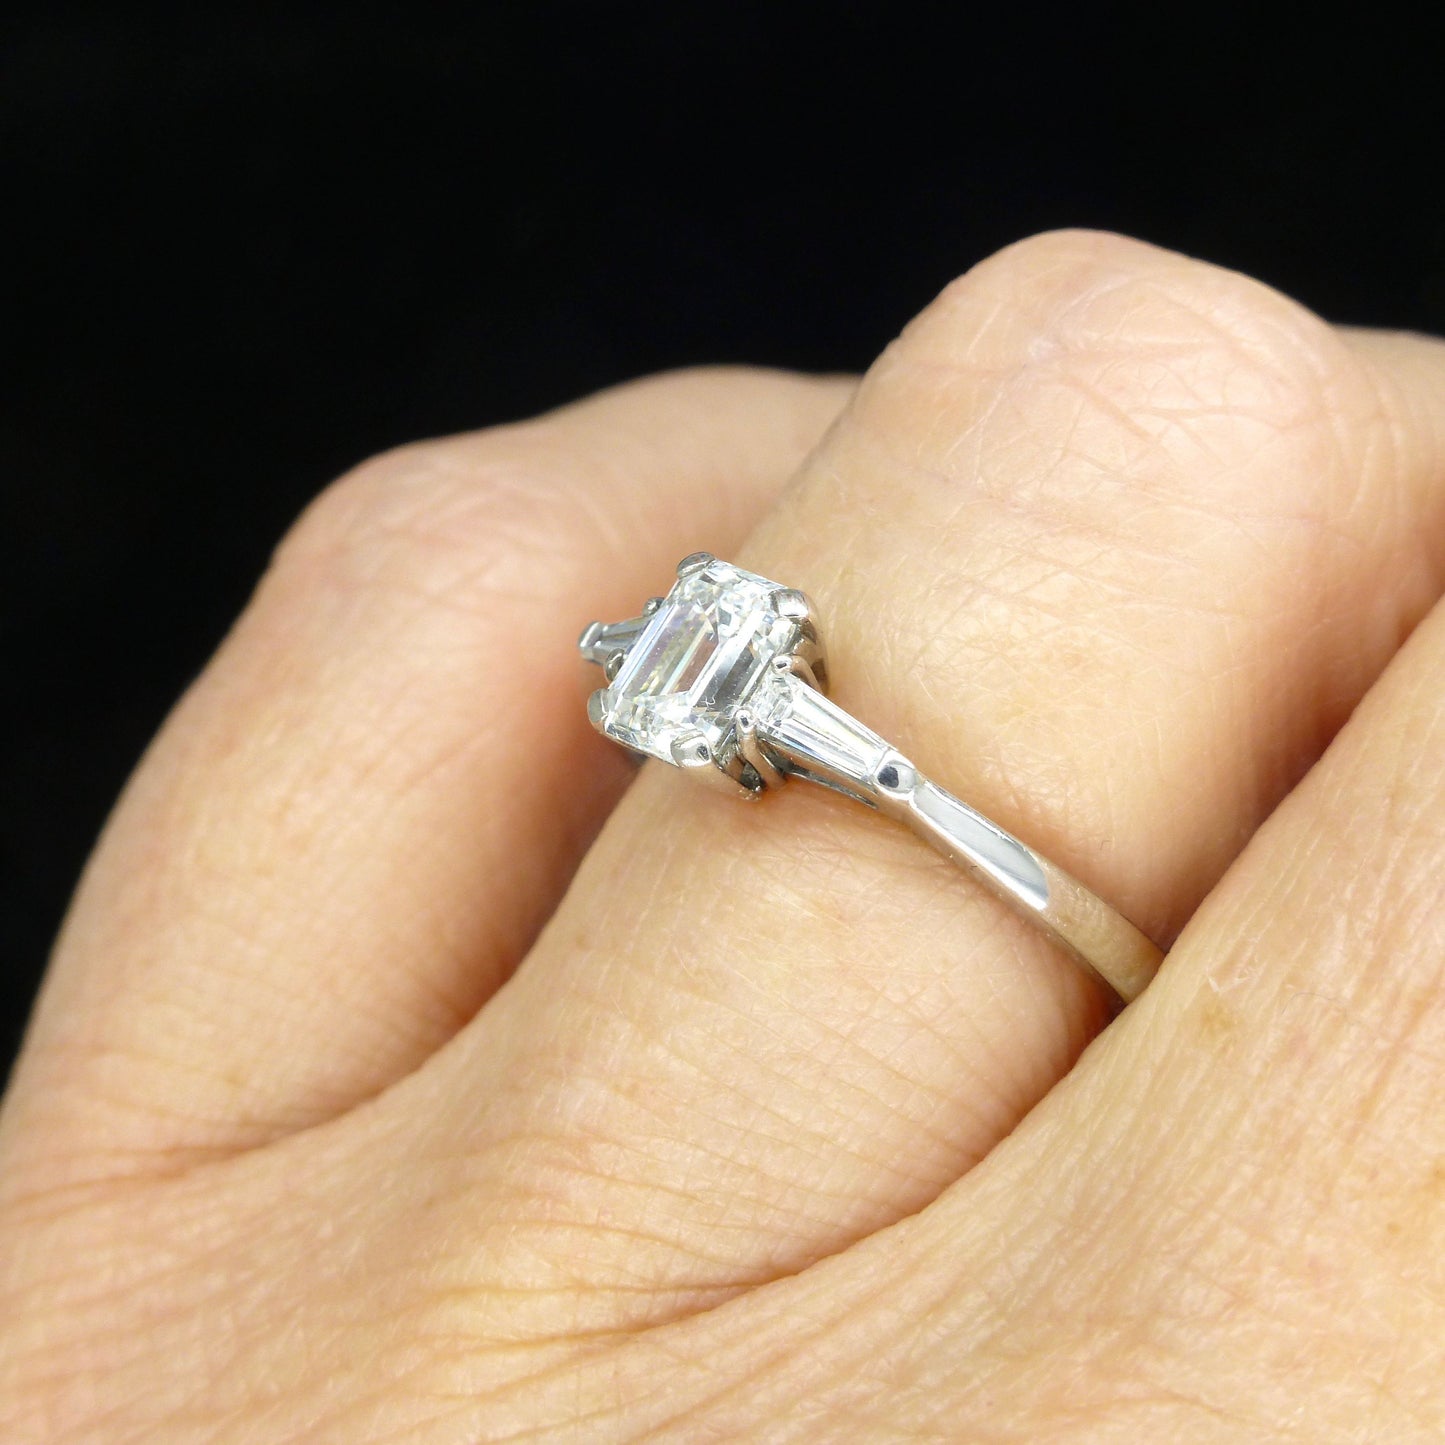 Stunning GIA emerald cut diamond solitaire engagement ring 0.74ct ~ With Valuation Certifcate.